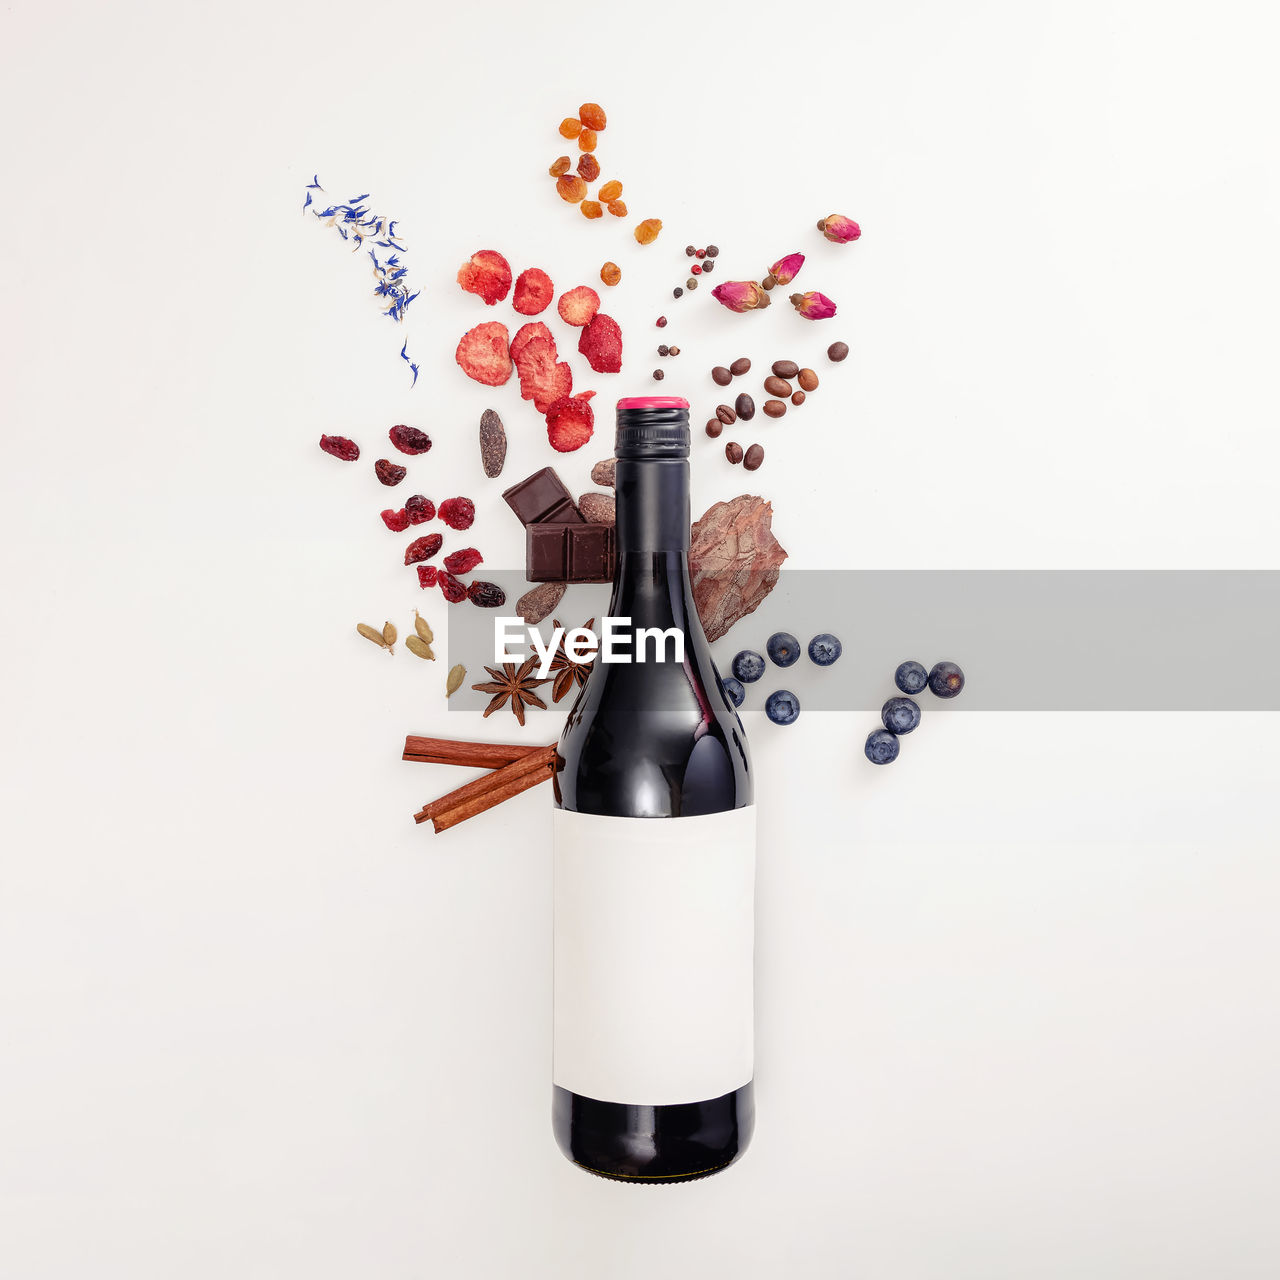 Composition with wine bottle and possible flavor components of red wine - berries, spices and other